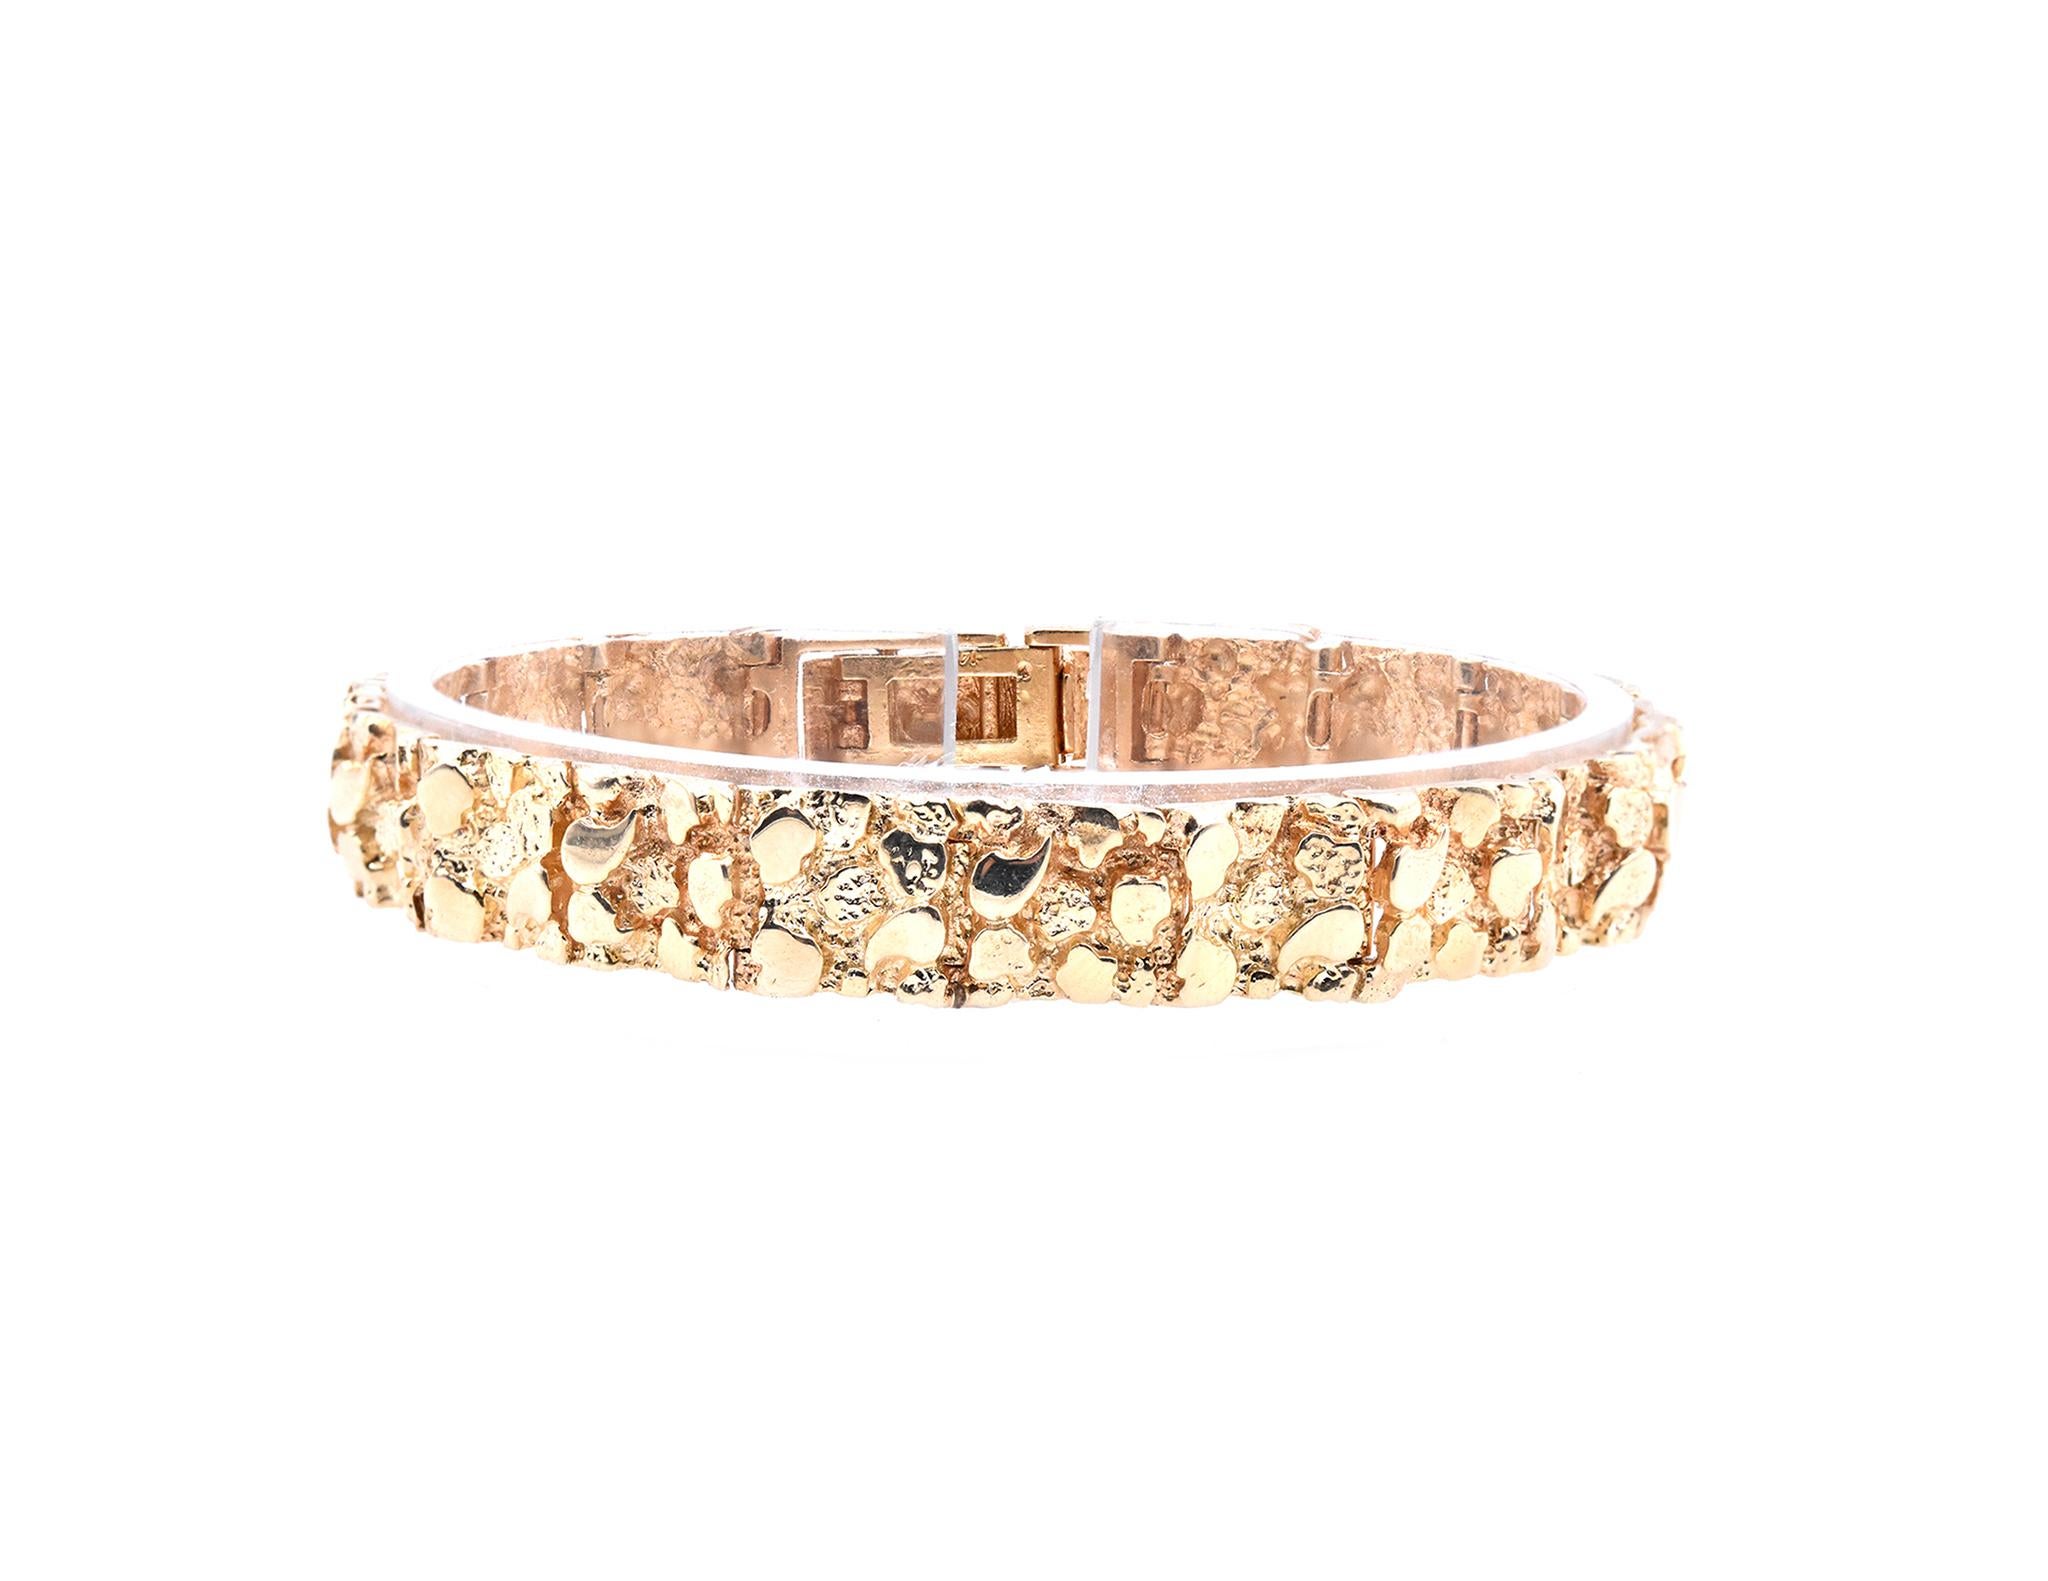 Designer: custom 
Material: 14k yellow gold
Dimensions: the bracelet will fit up to a 7.5-inch wrist, links measure 9.7mm wide
Weight: 23.3 grams